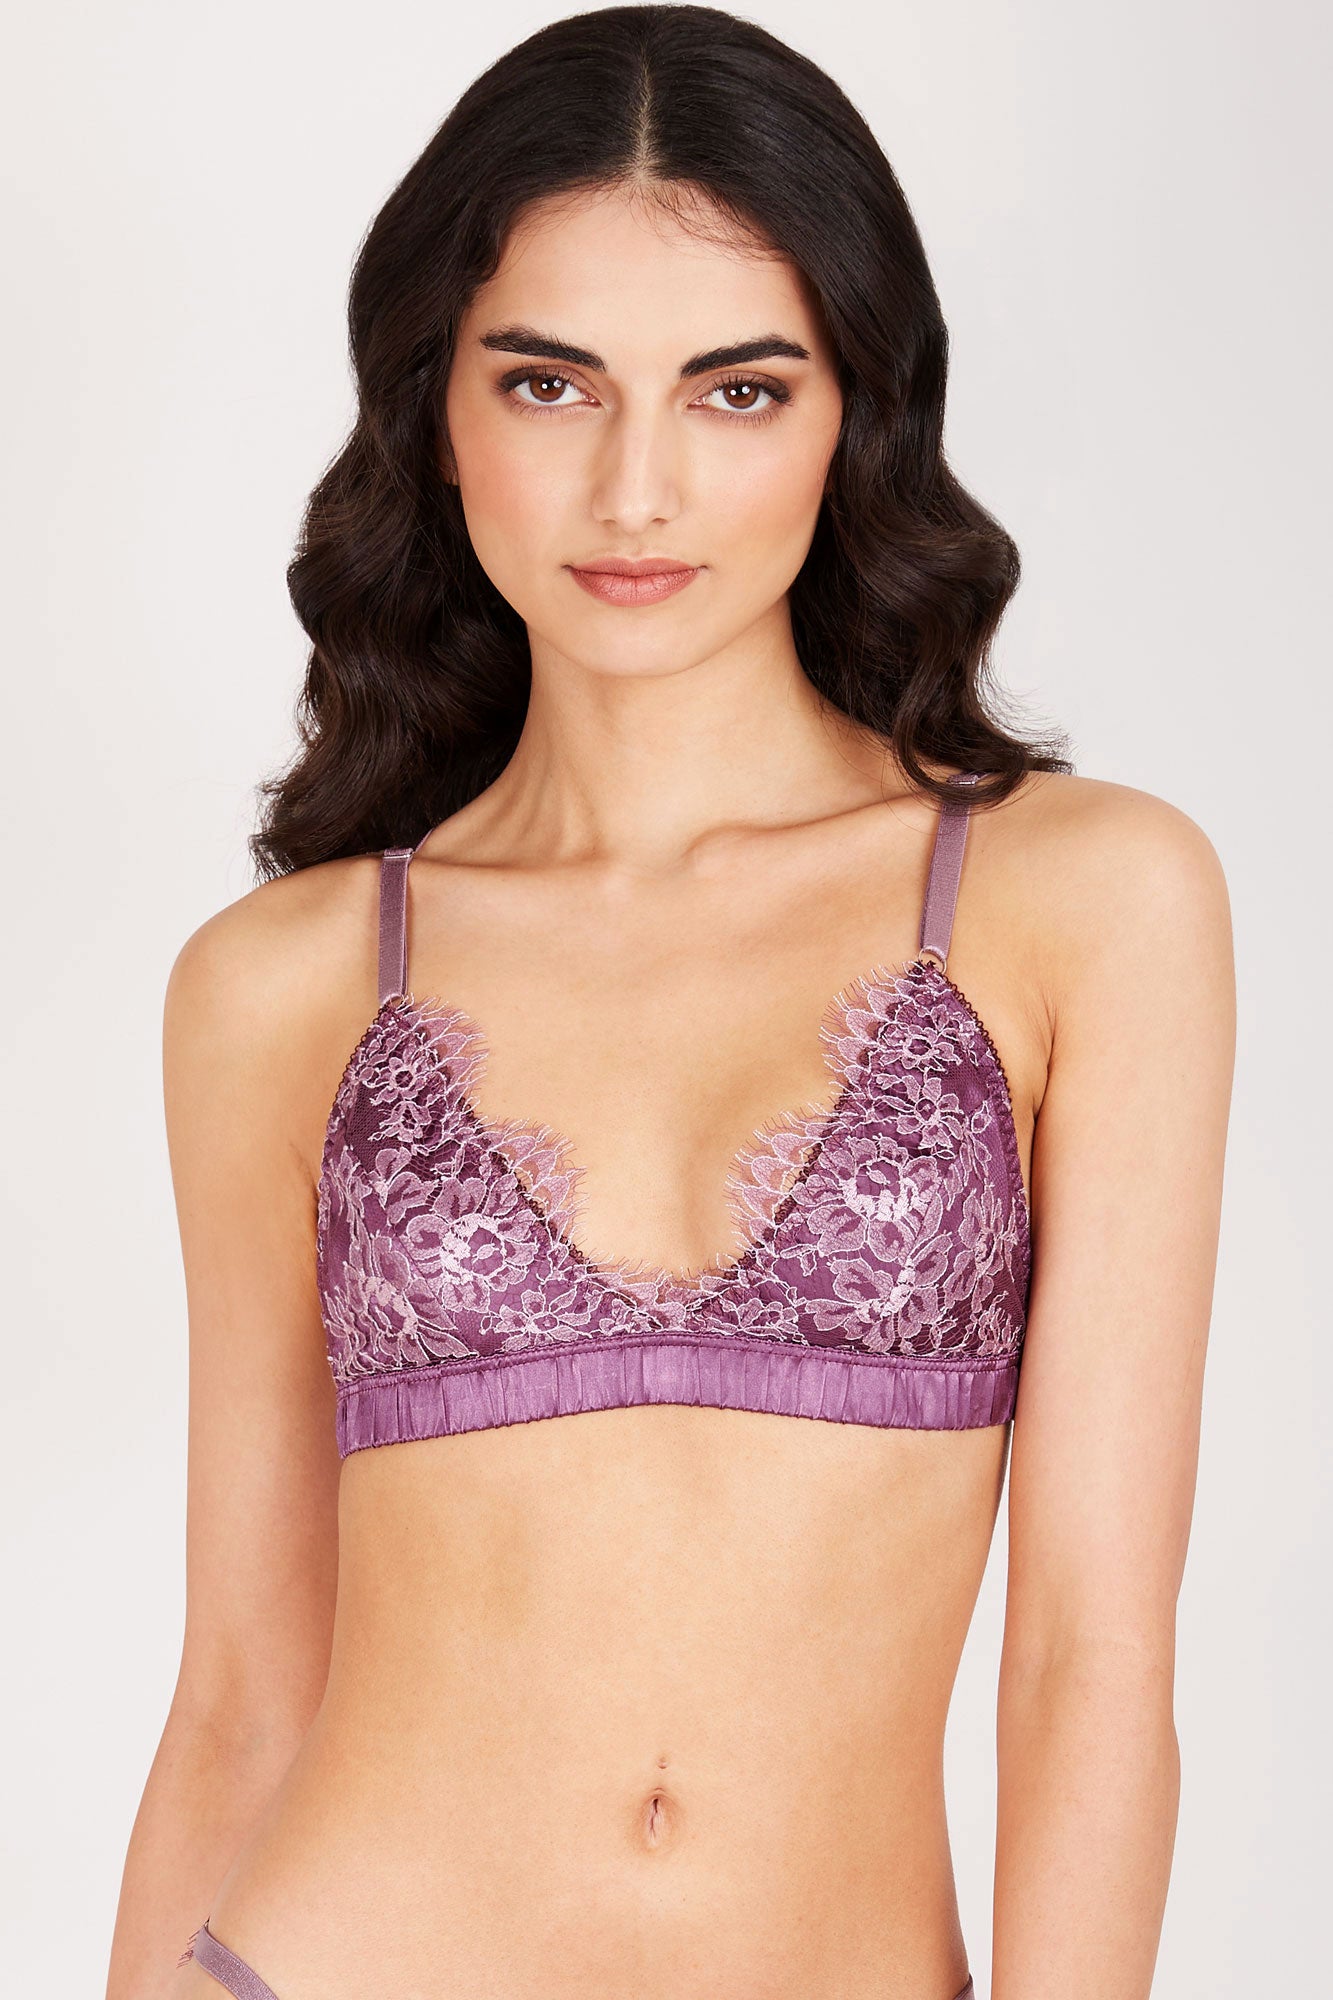 French lace bralette with pure silk lining